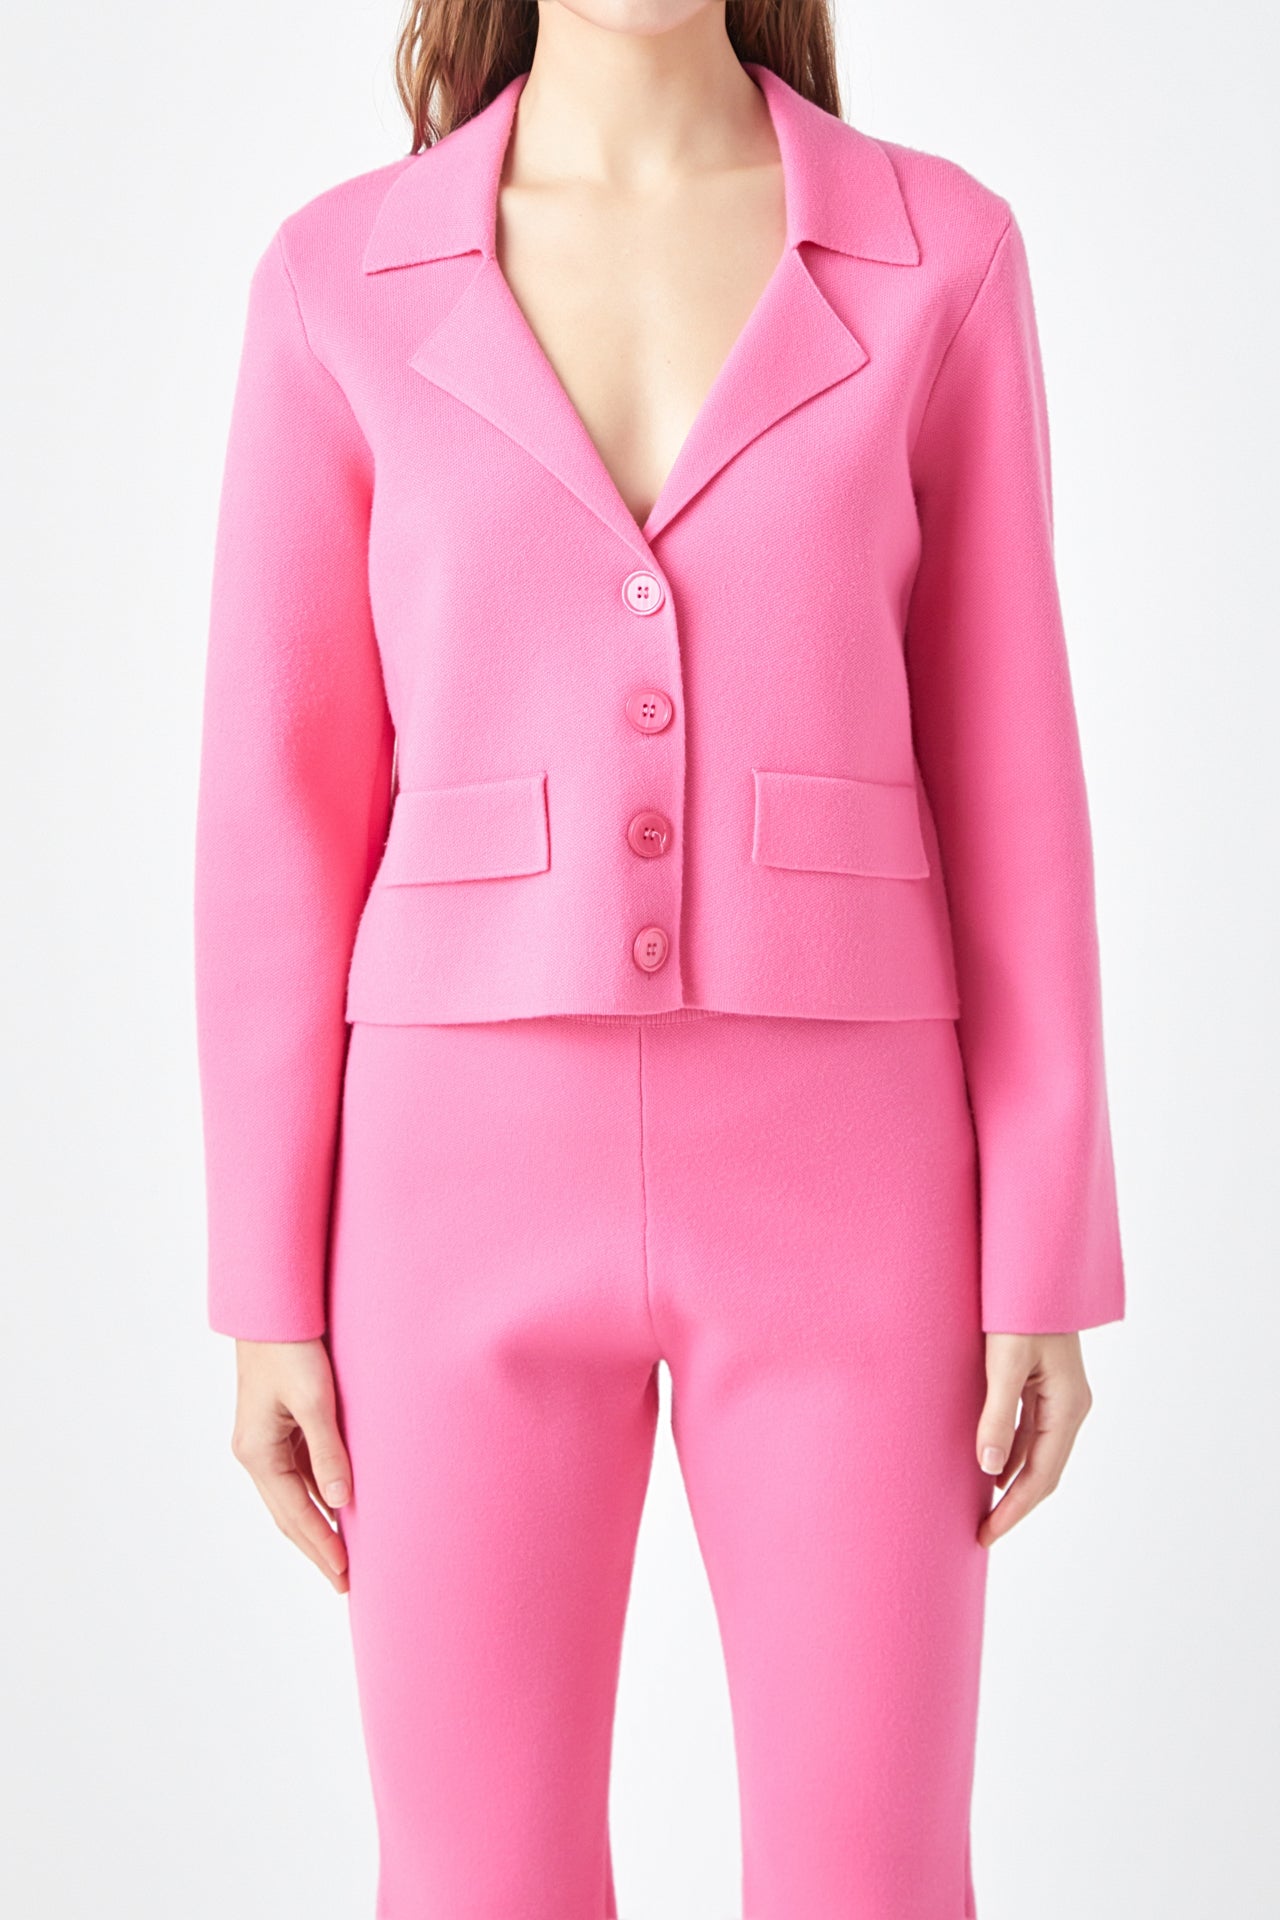 ENDLESS ROSE - Sweater Blazer - BLAZERS available at Objectrare